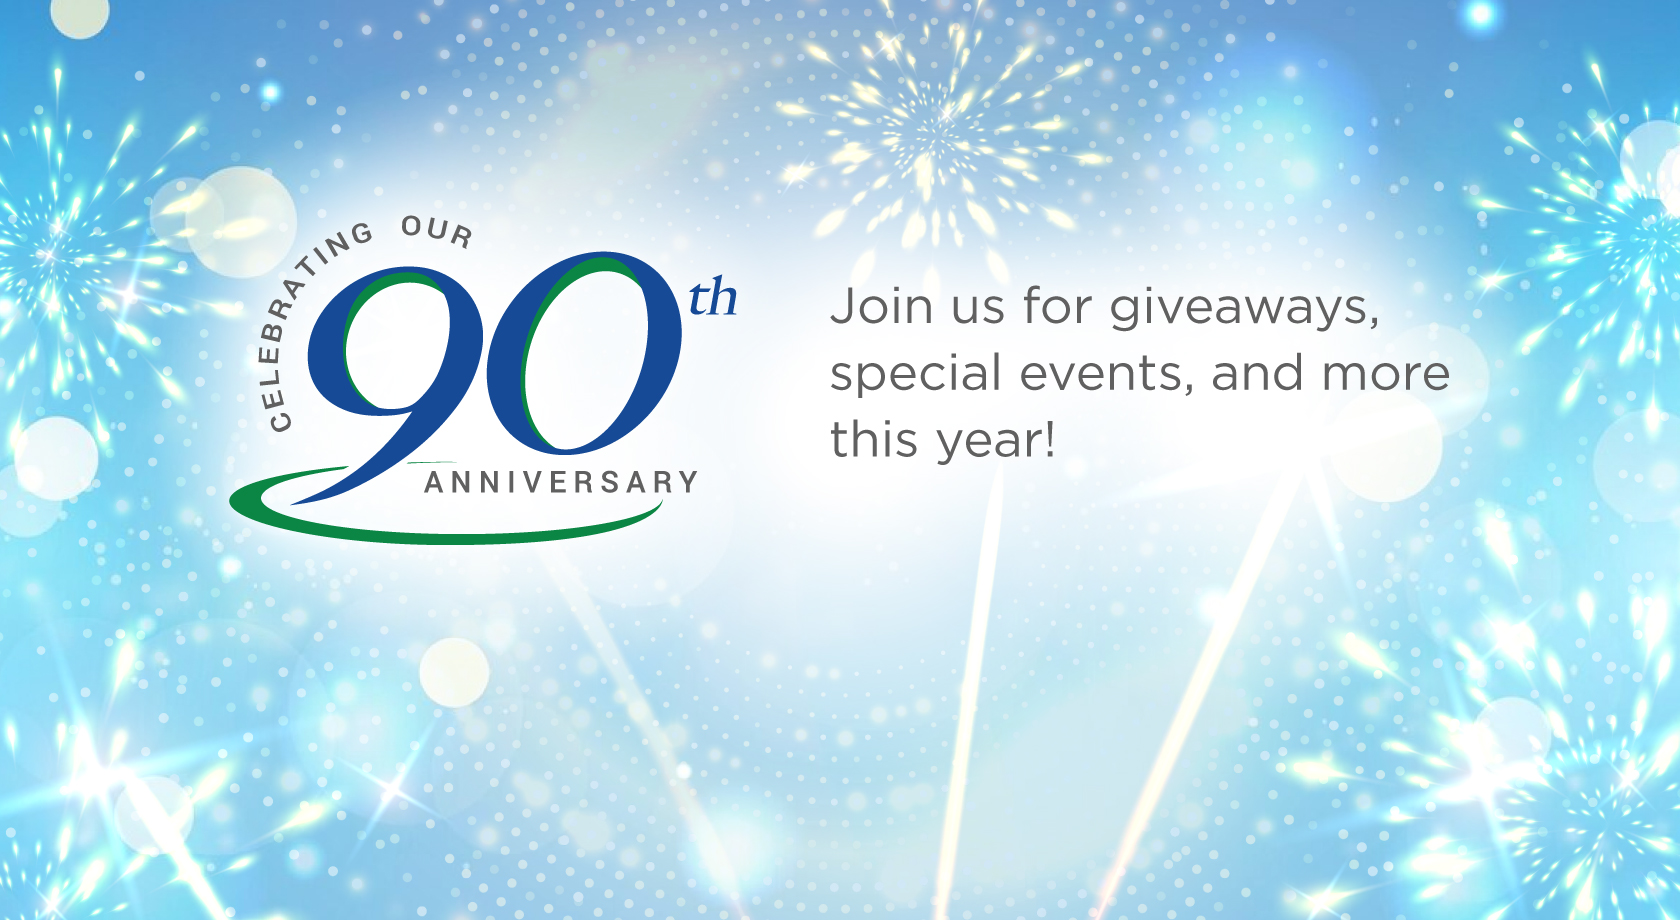 Celebrating Our 90th Anniversary. Join us for giveaways, special events, and more this year!